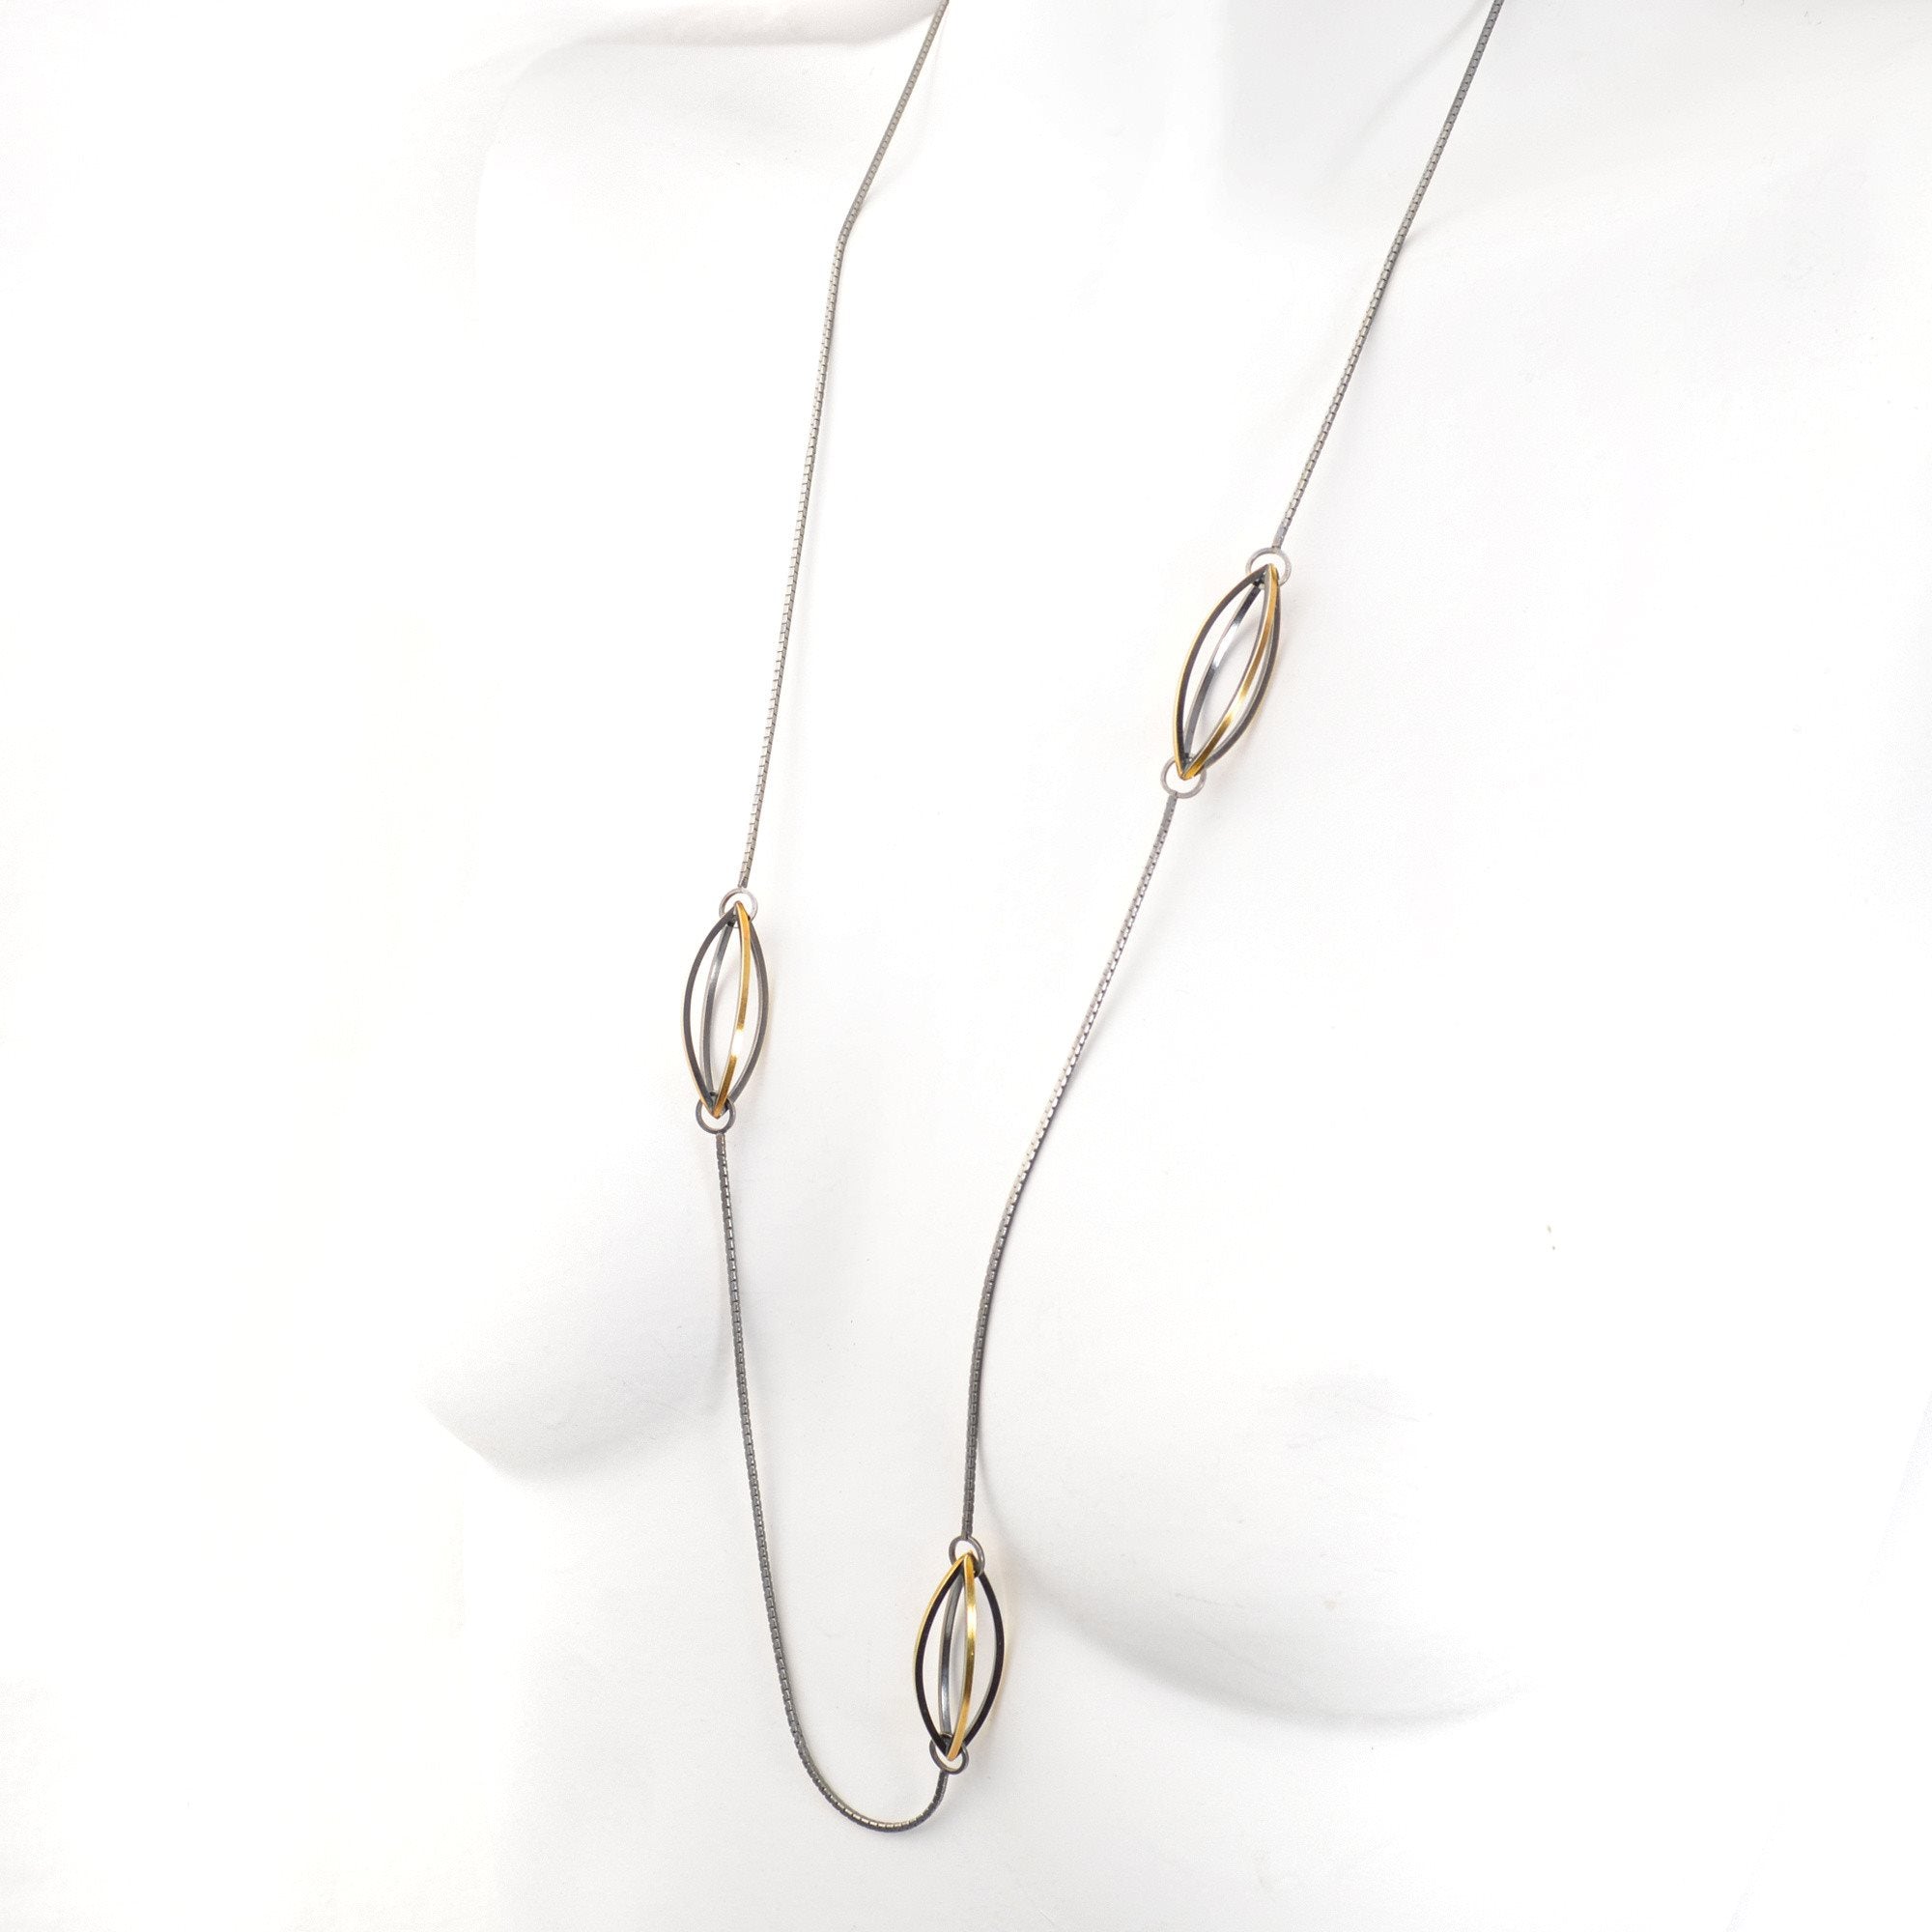 Lattis Long Necklace with Three Streamline Shapes in Sterling Silver, 22k gold and Blackened Patina